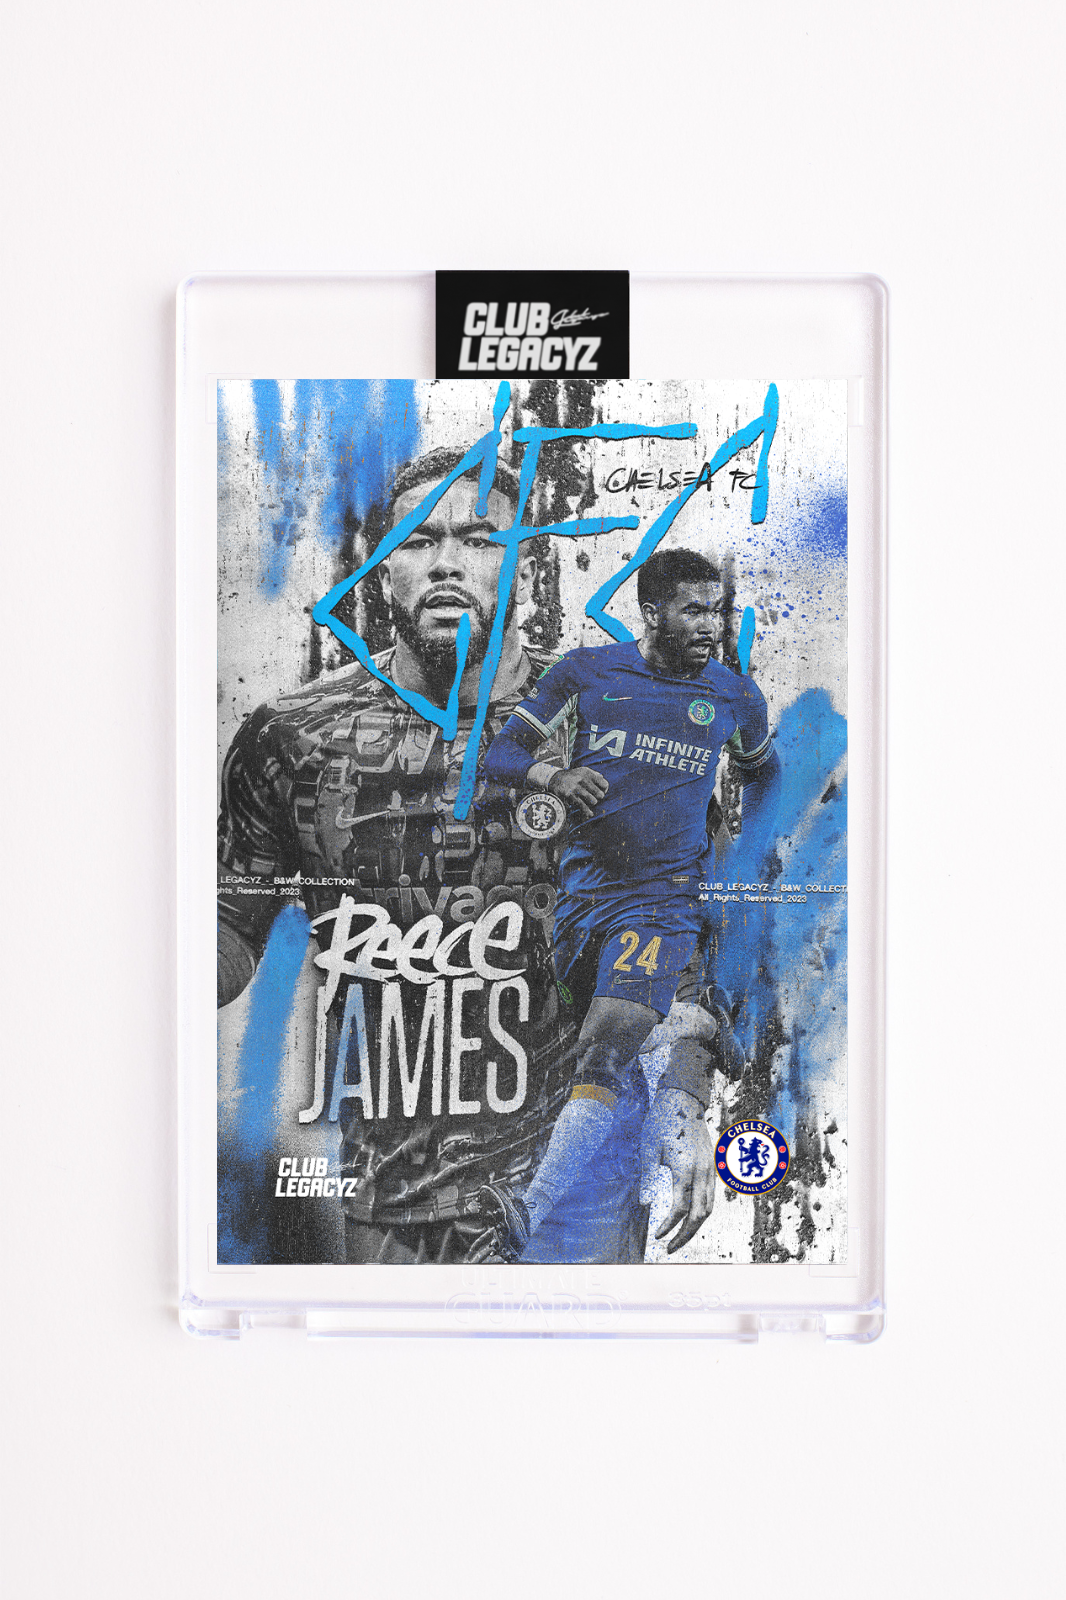 Chelsea FC - Reece James Black & White Icon limited to 100